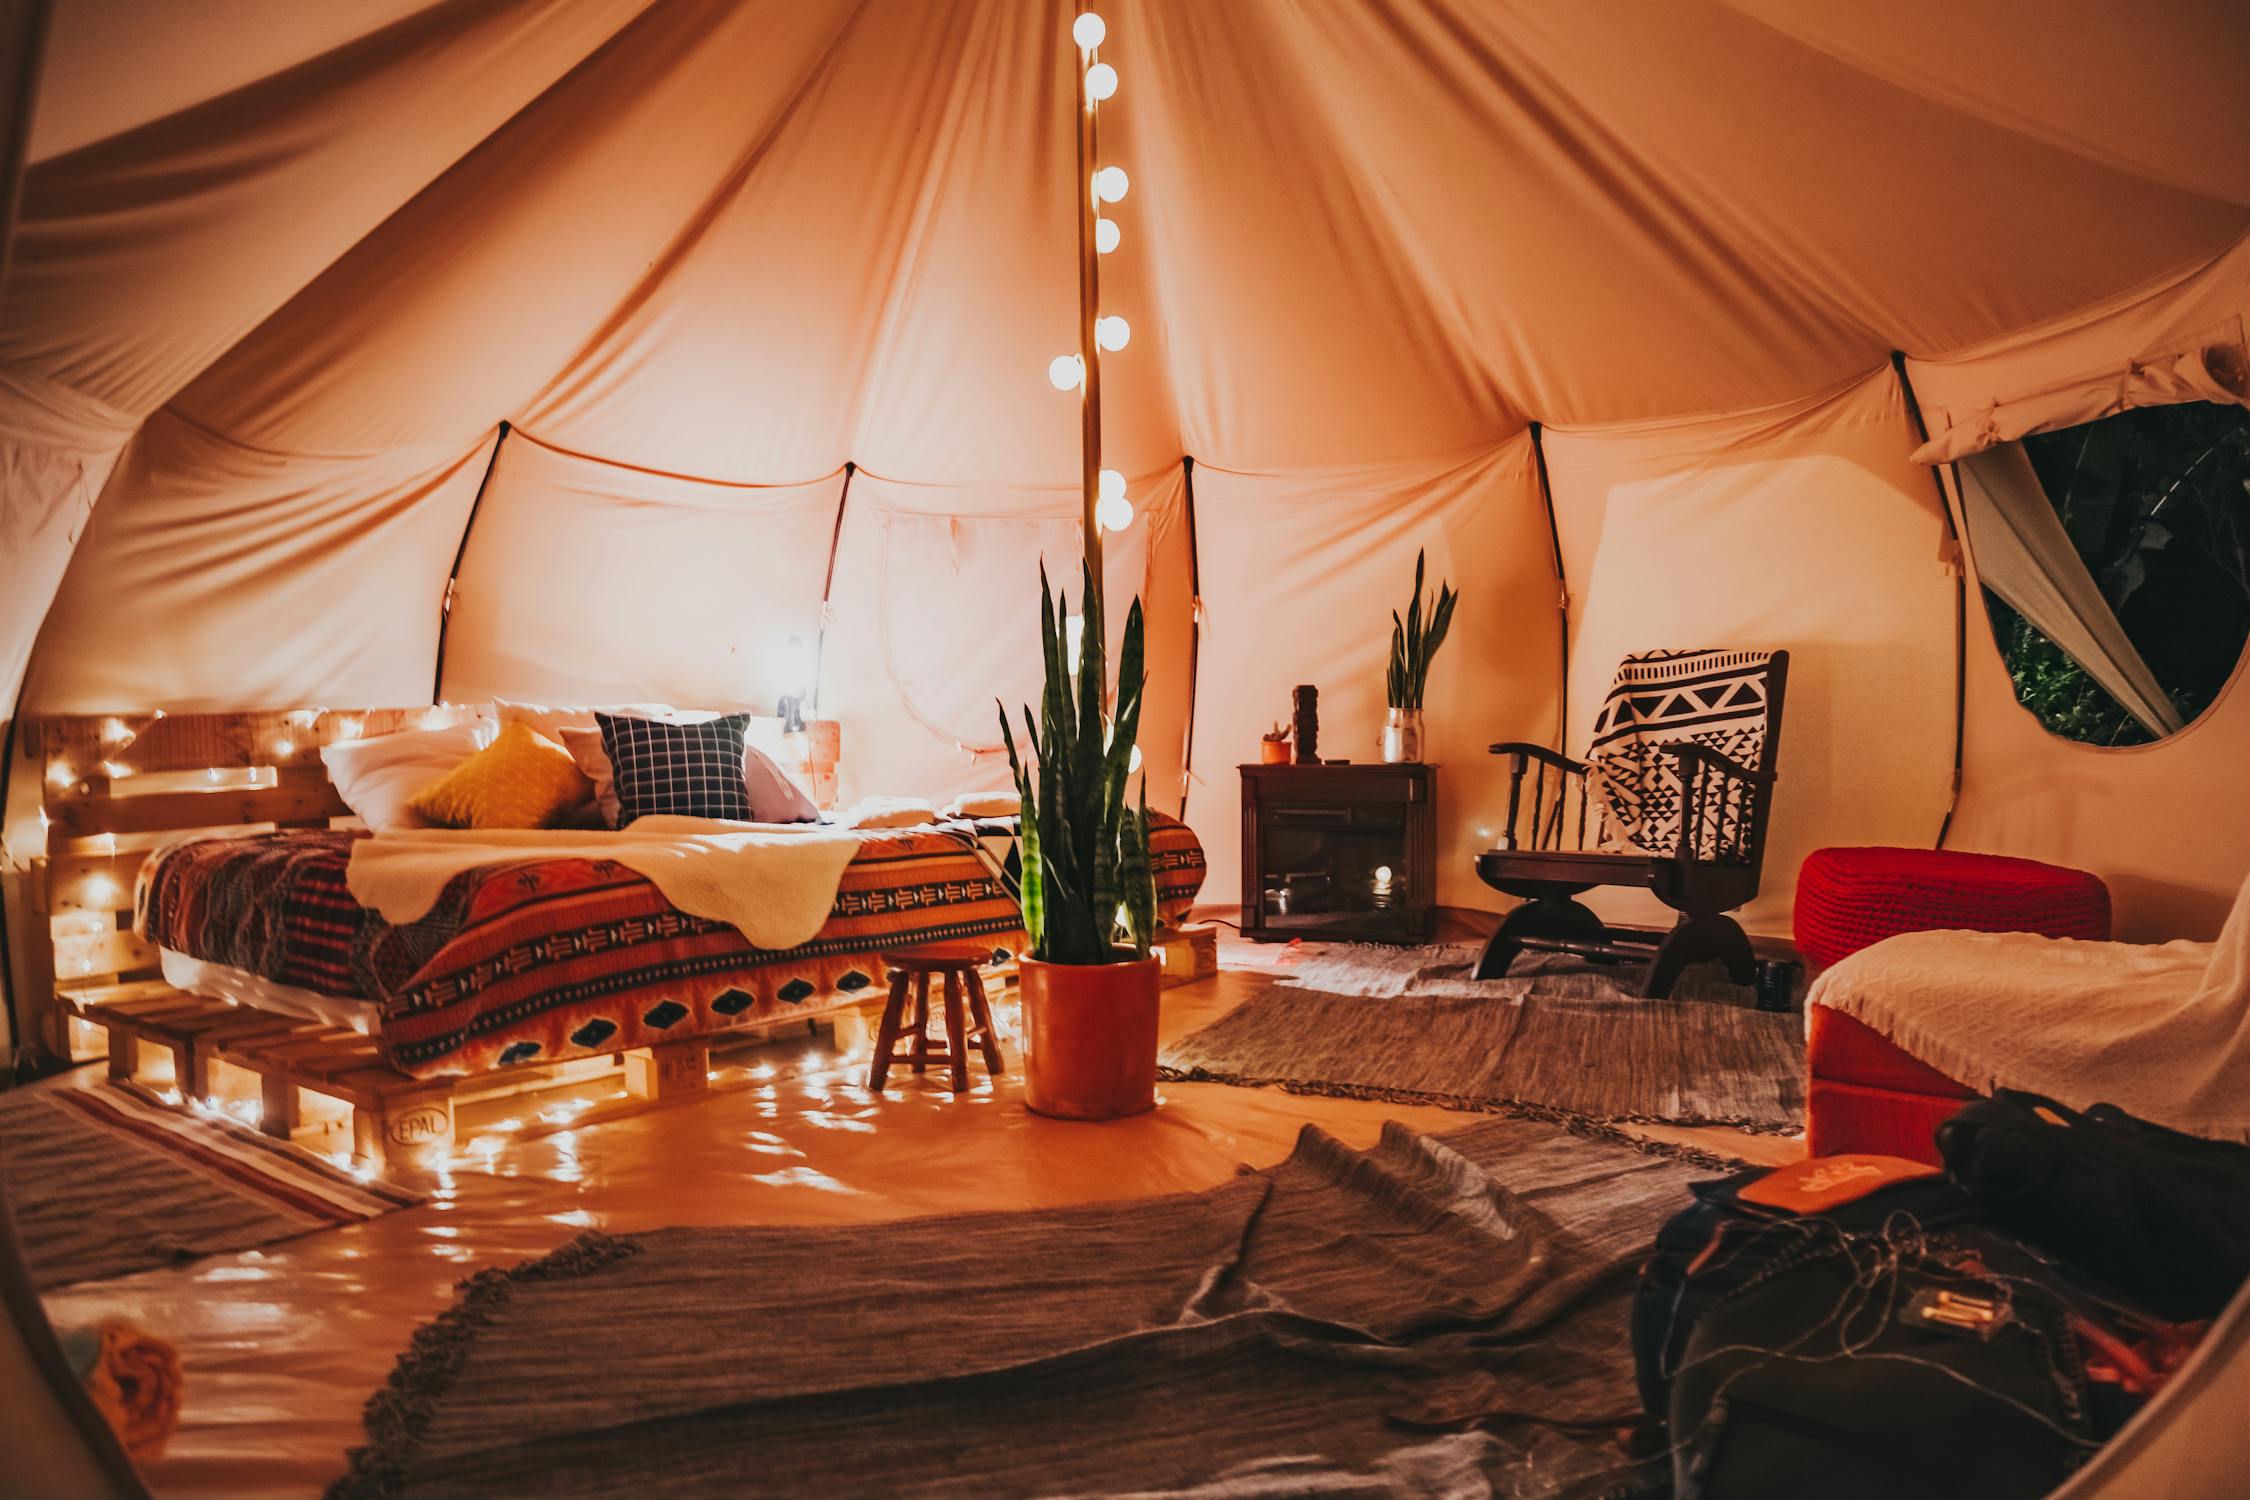 Explore the Wild in Style: Have You Tried Glamping